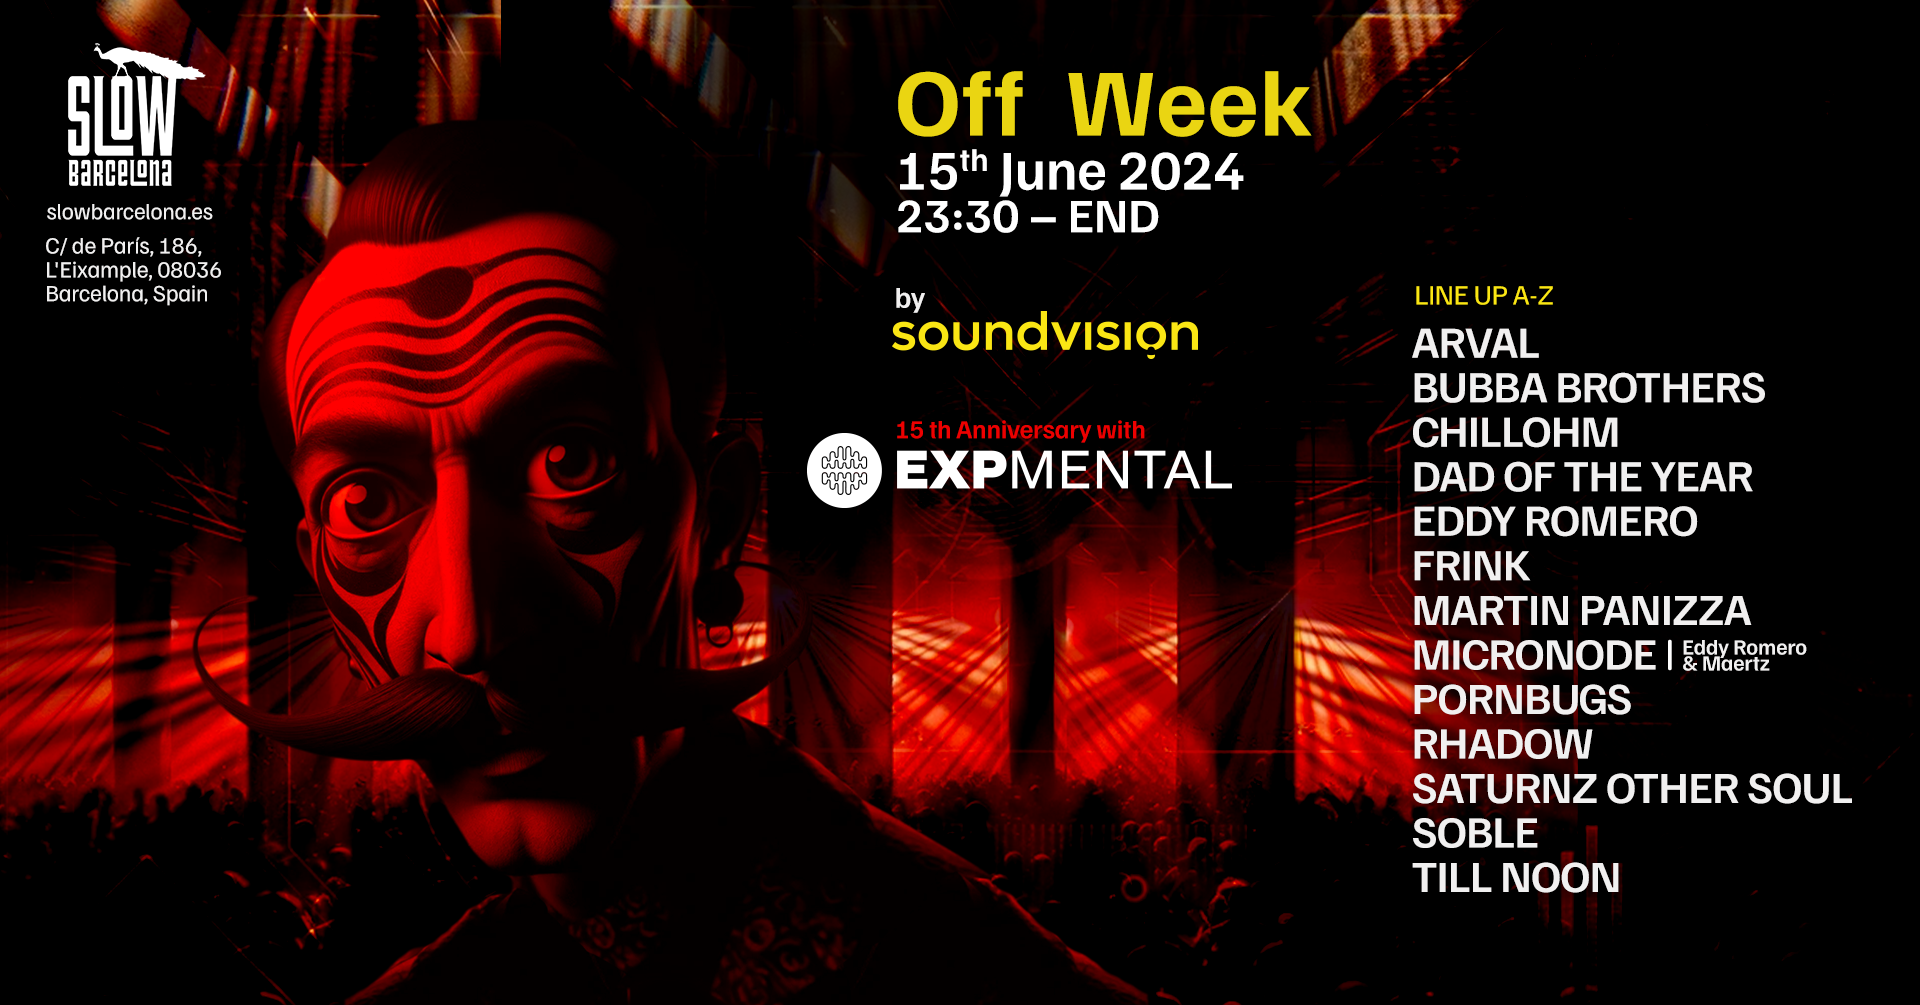 Expemtal by Soundvision OFF WEEK Showcase - Página frontal